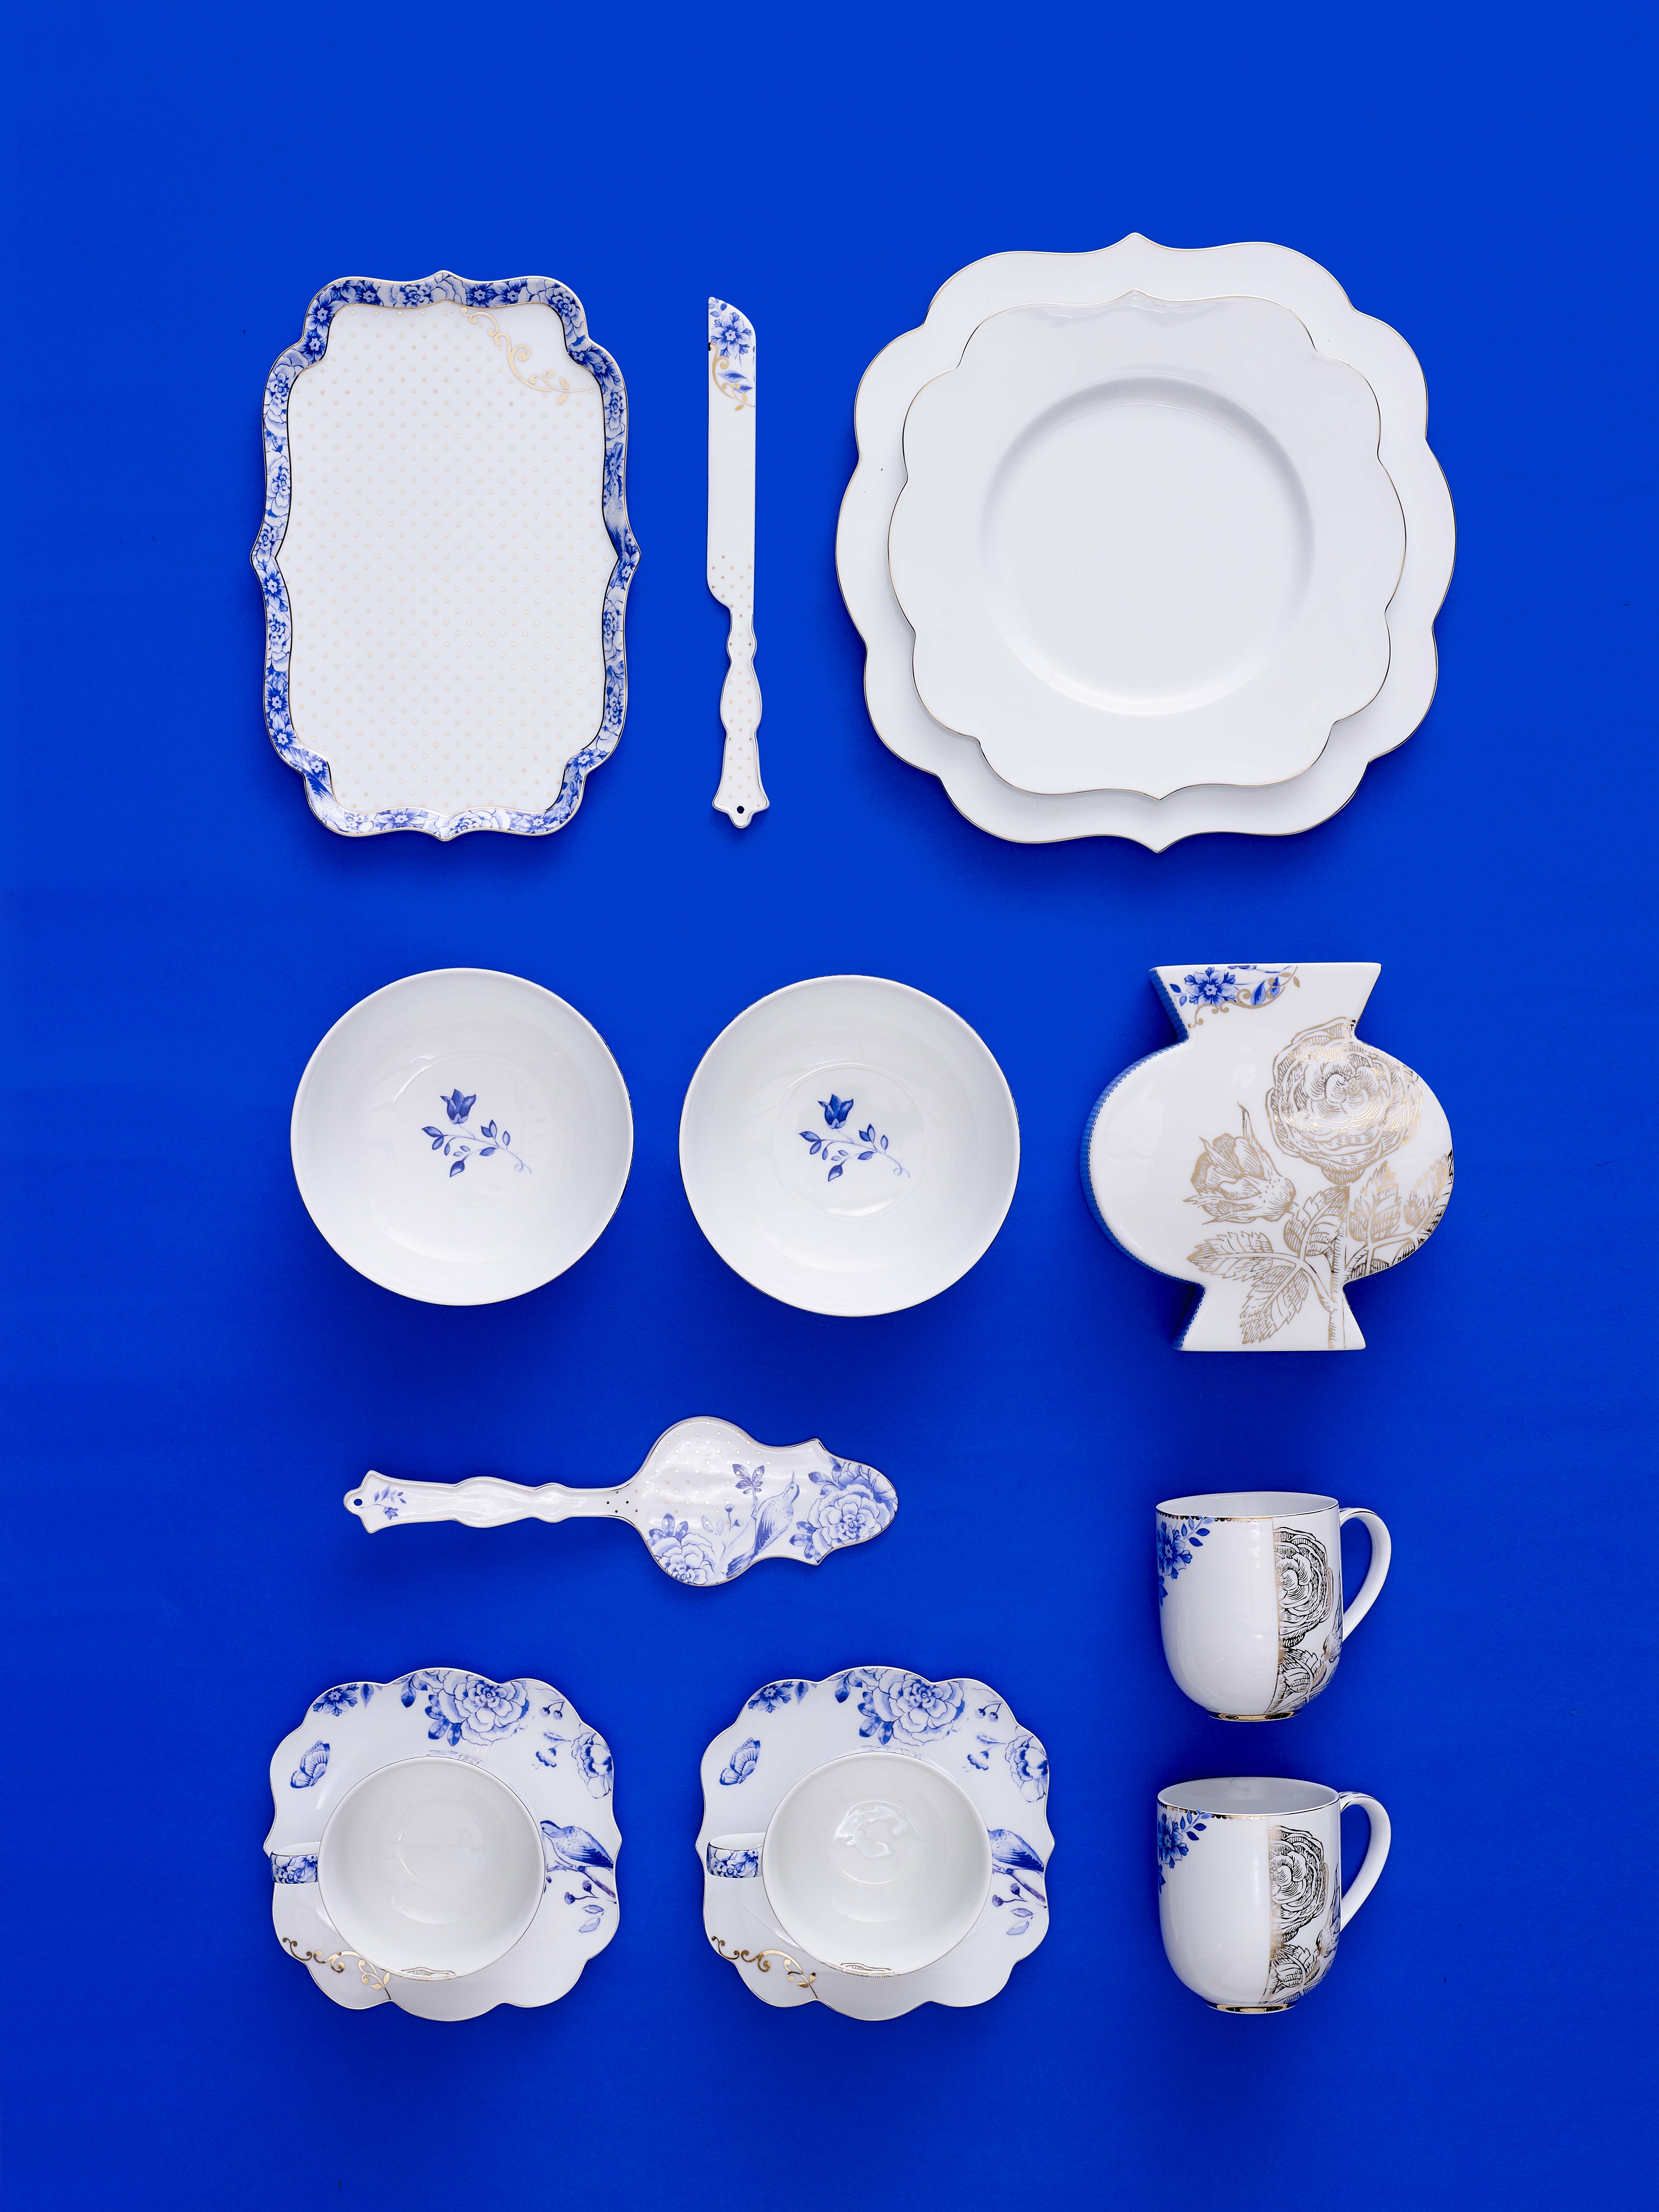 royal-white-overview-blue-background